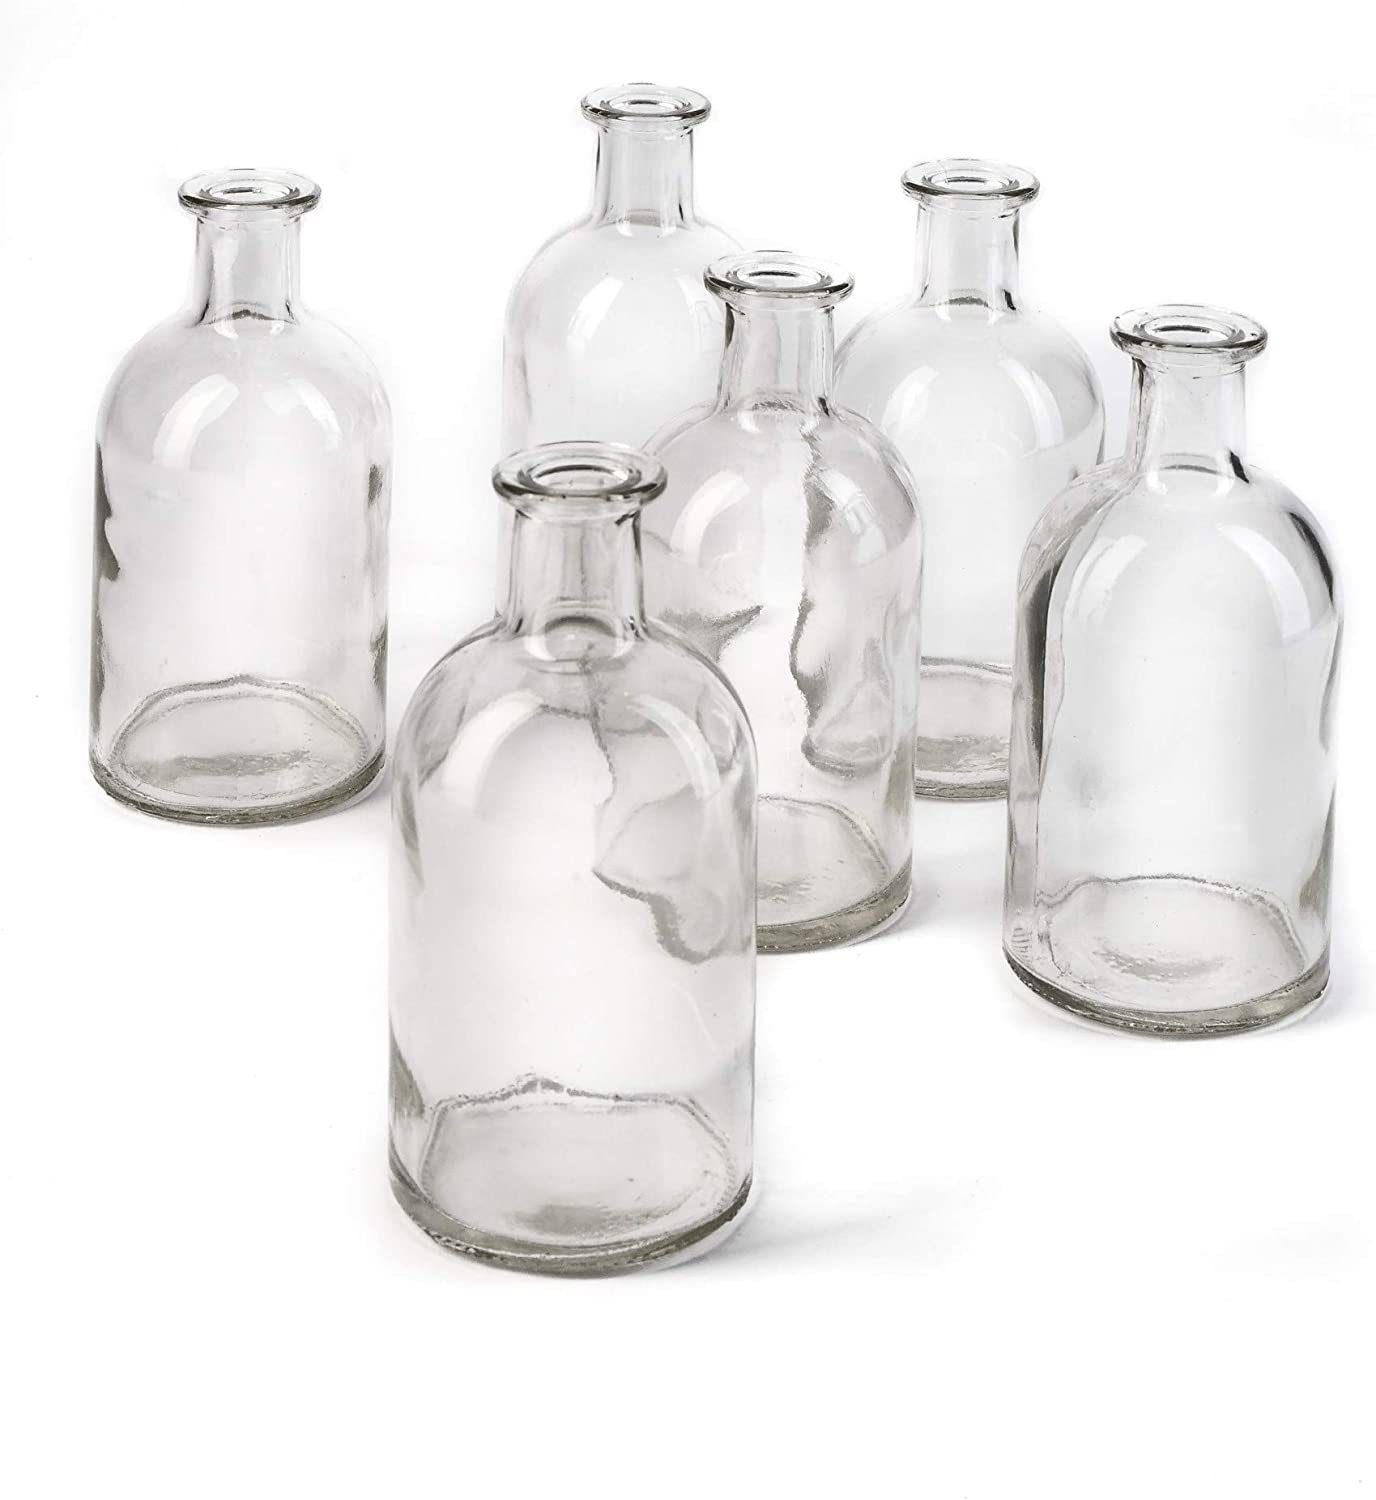 Primary image for Serene Spaces Living Bud Vases, Apothecary Jars, Decorative Glass, Set Of 6).